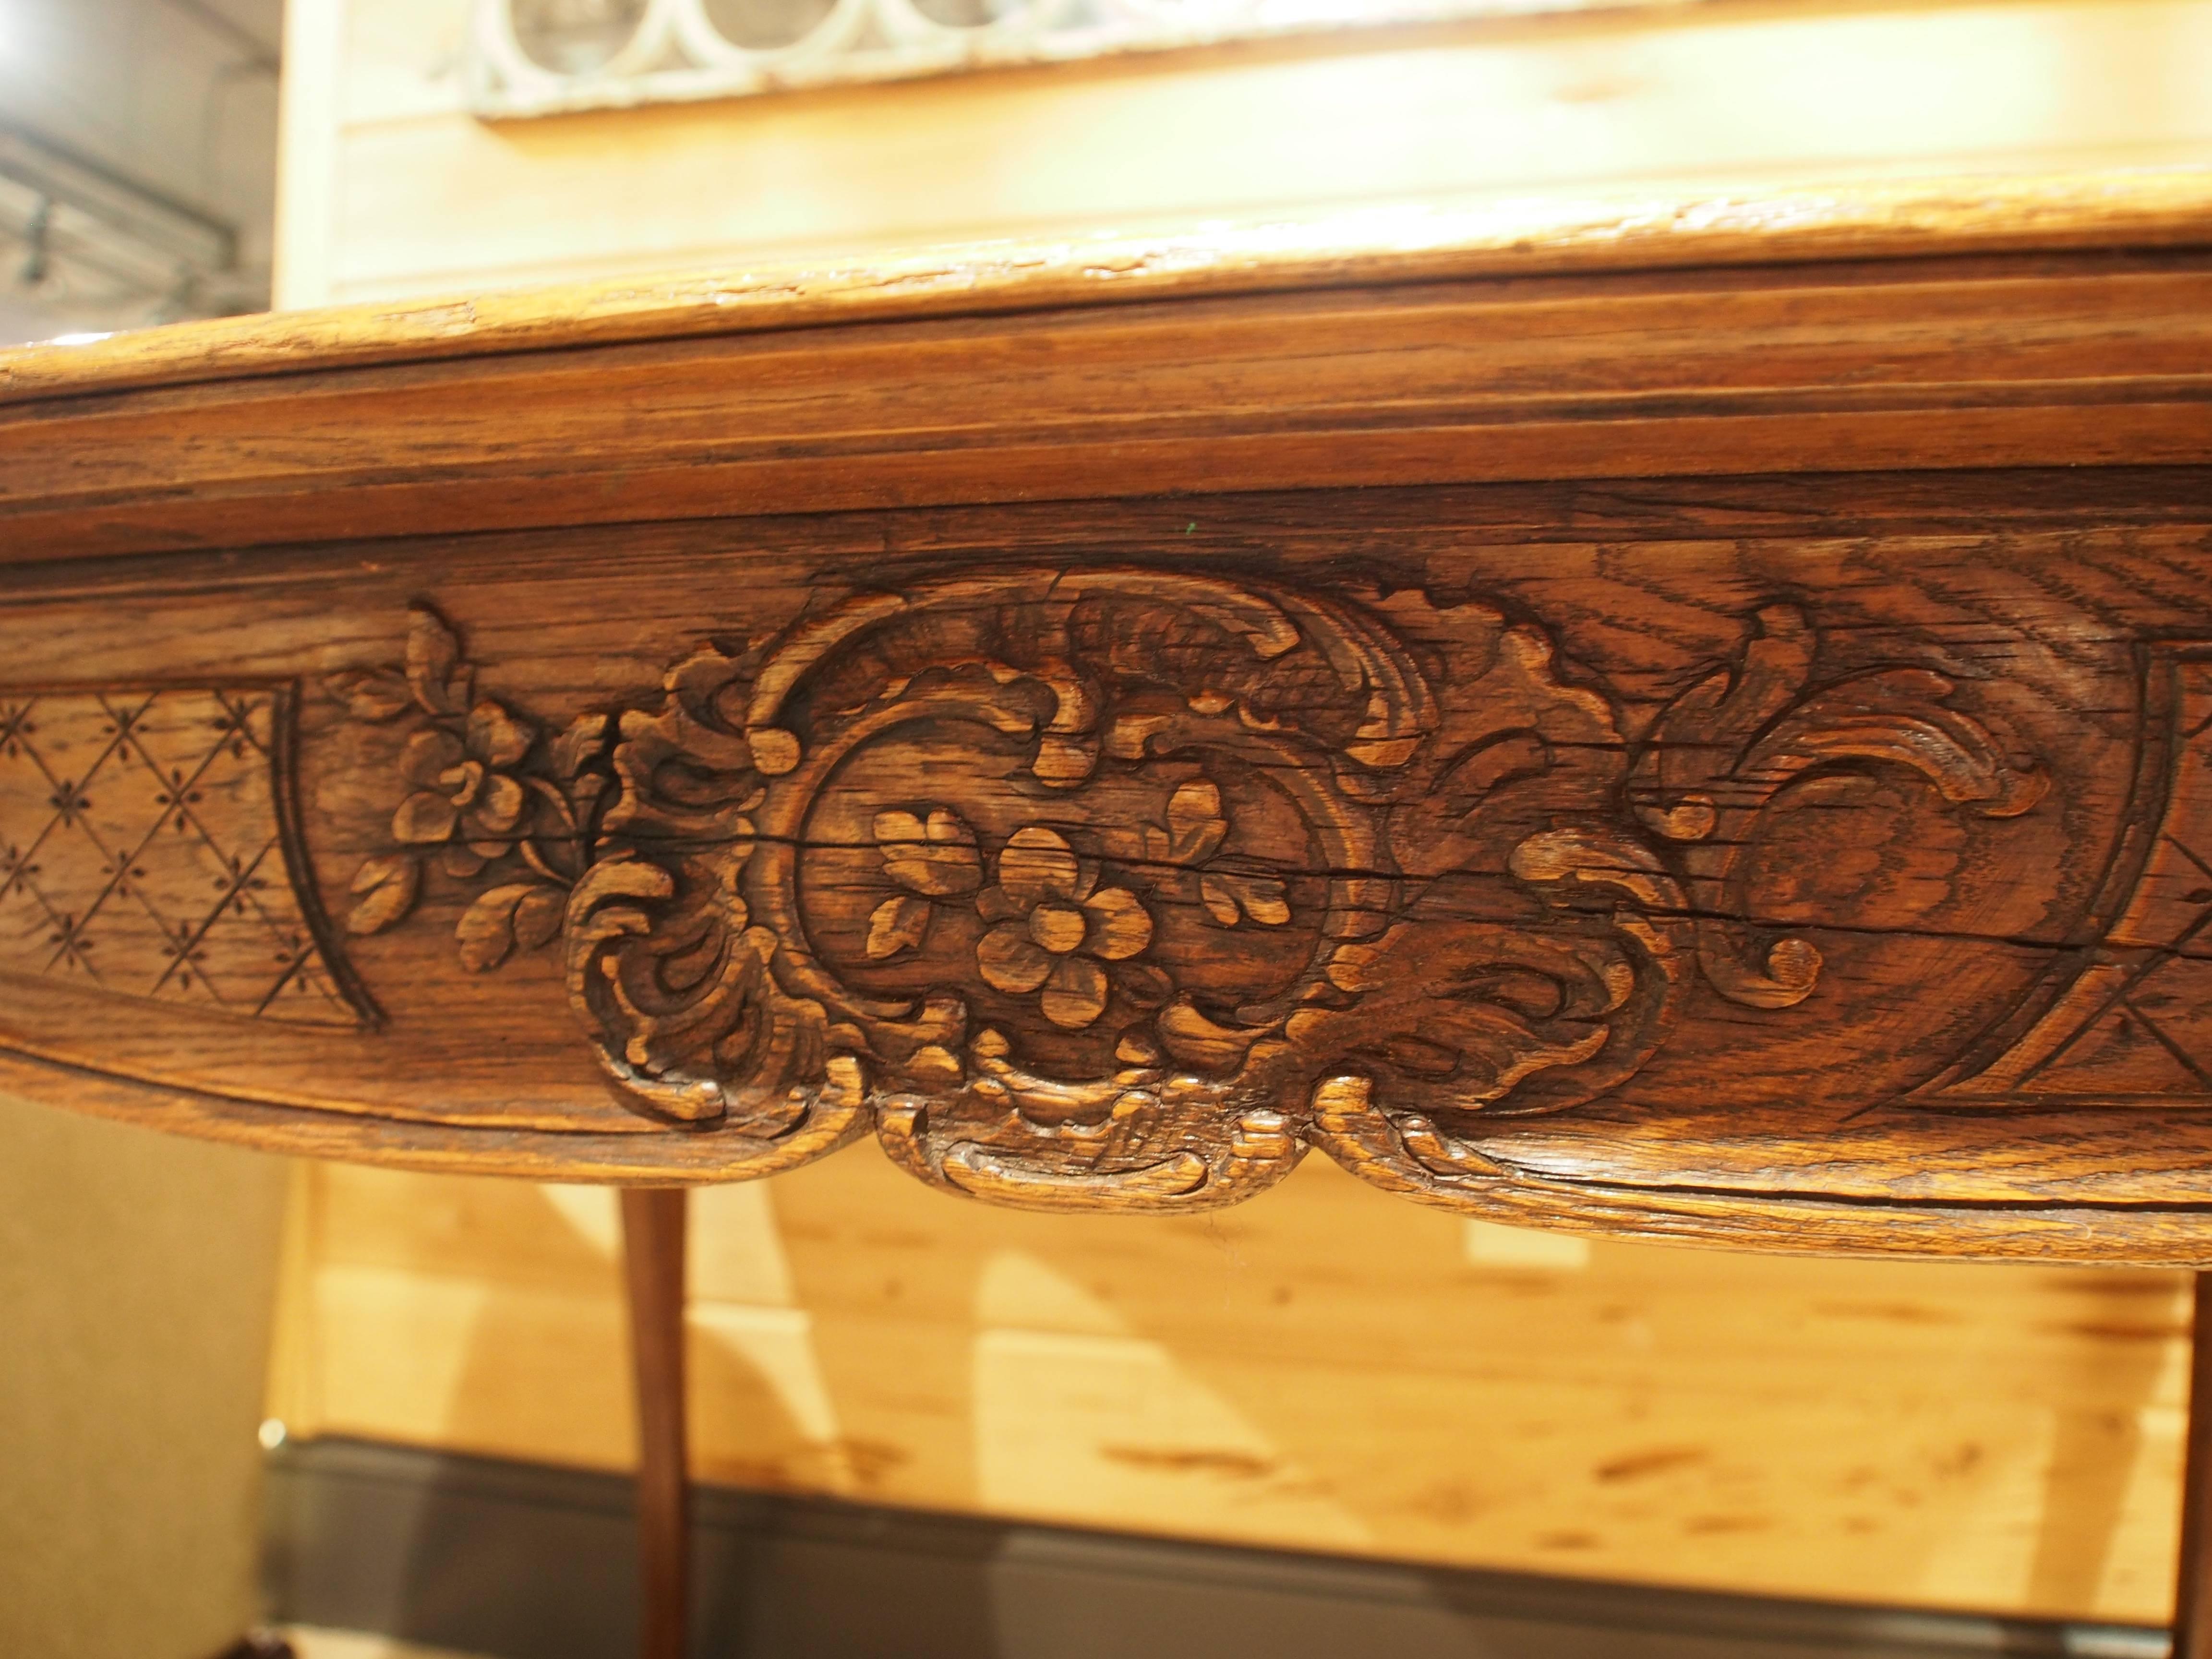 Oak table with ornate carved apron and cabriole legs with hoof feet.